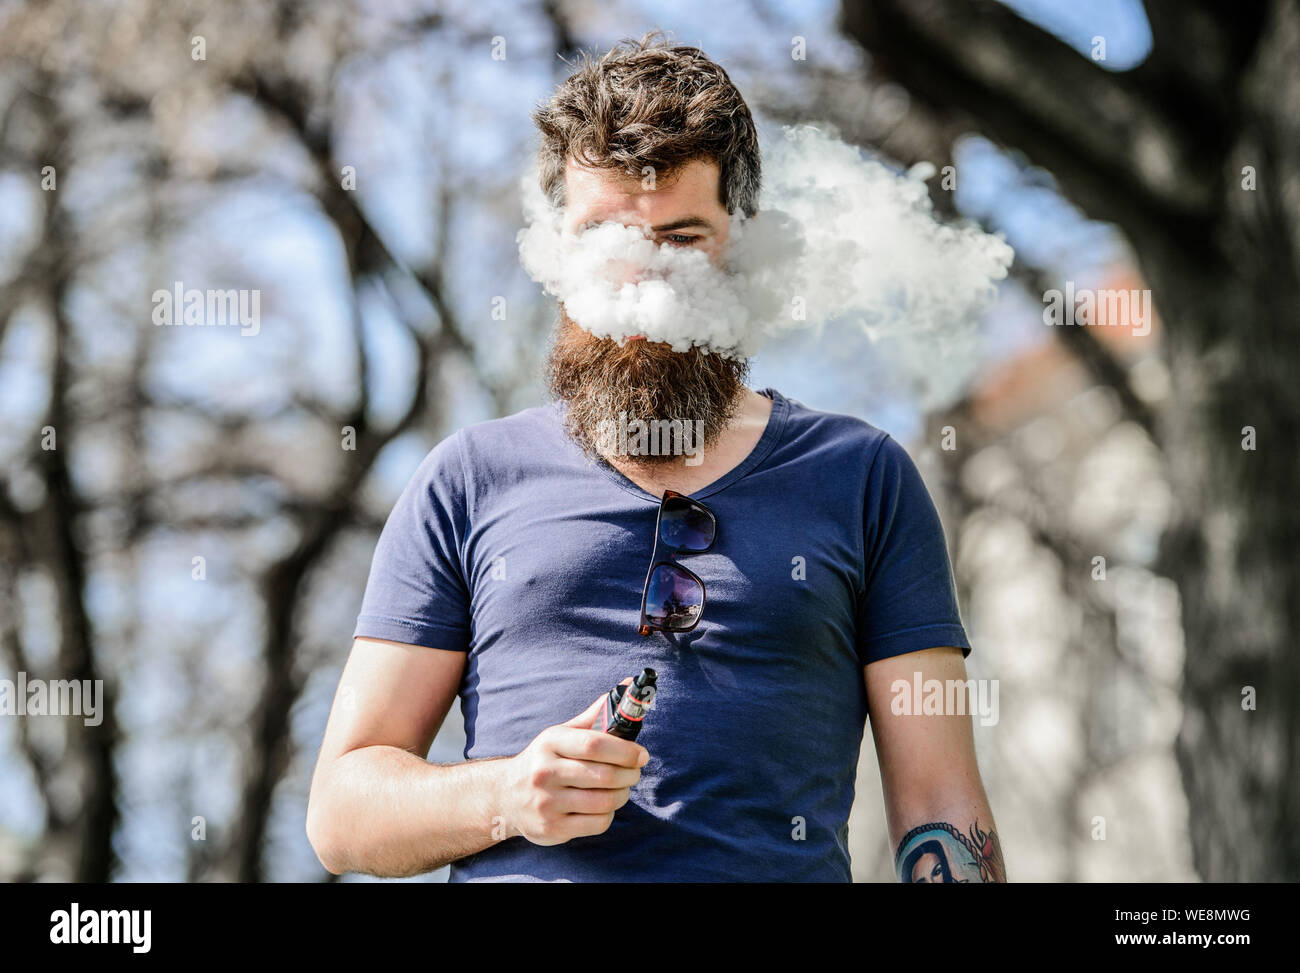 Bearded man smoking vape. Smoking electronic cigarette. Man long beard  relaxed with smoking habit. Man with beard and mustache breathe out smoke.  White clouds of flavored smoke. Stress relief concept Stock Photo -